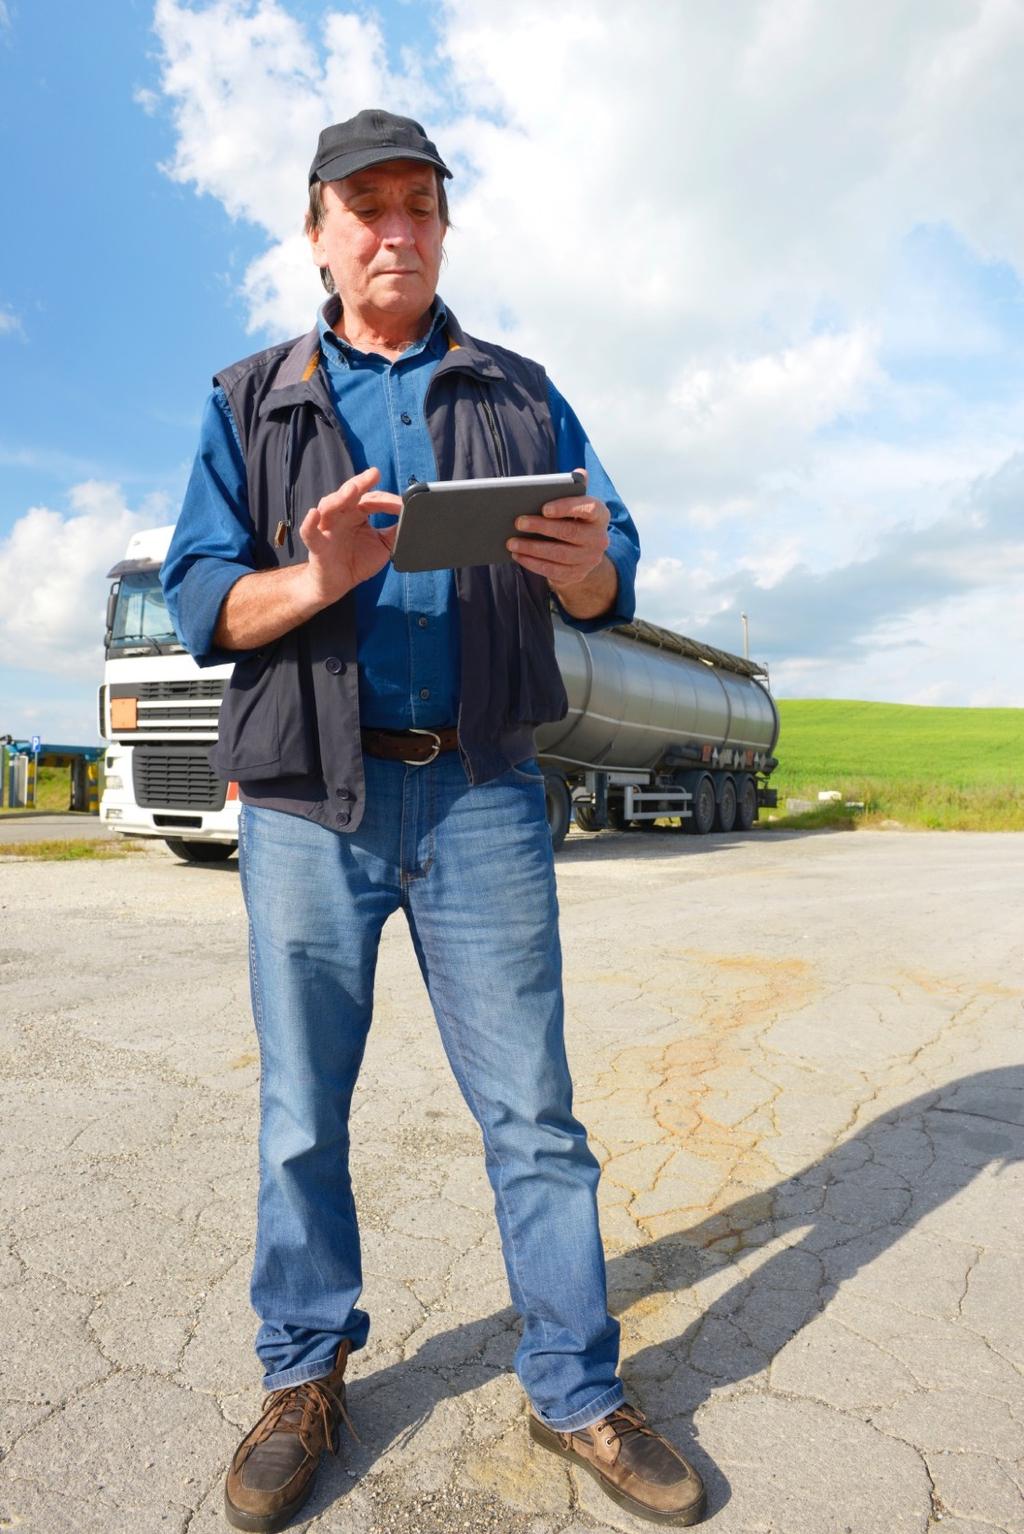 What is the ELD Mandate? The Electronic Logging Device (ELD) rule was published by the Federal Motor Carrier Safety Administration (FMCSA) on December 16, 2015.